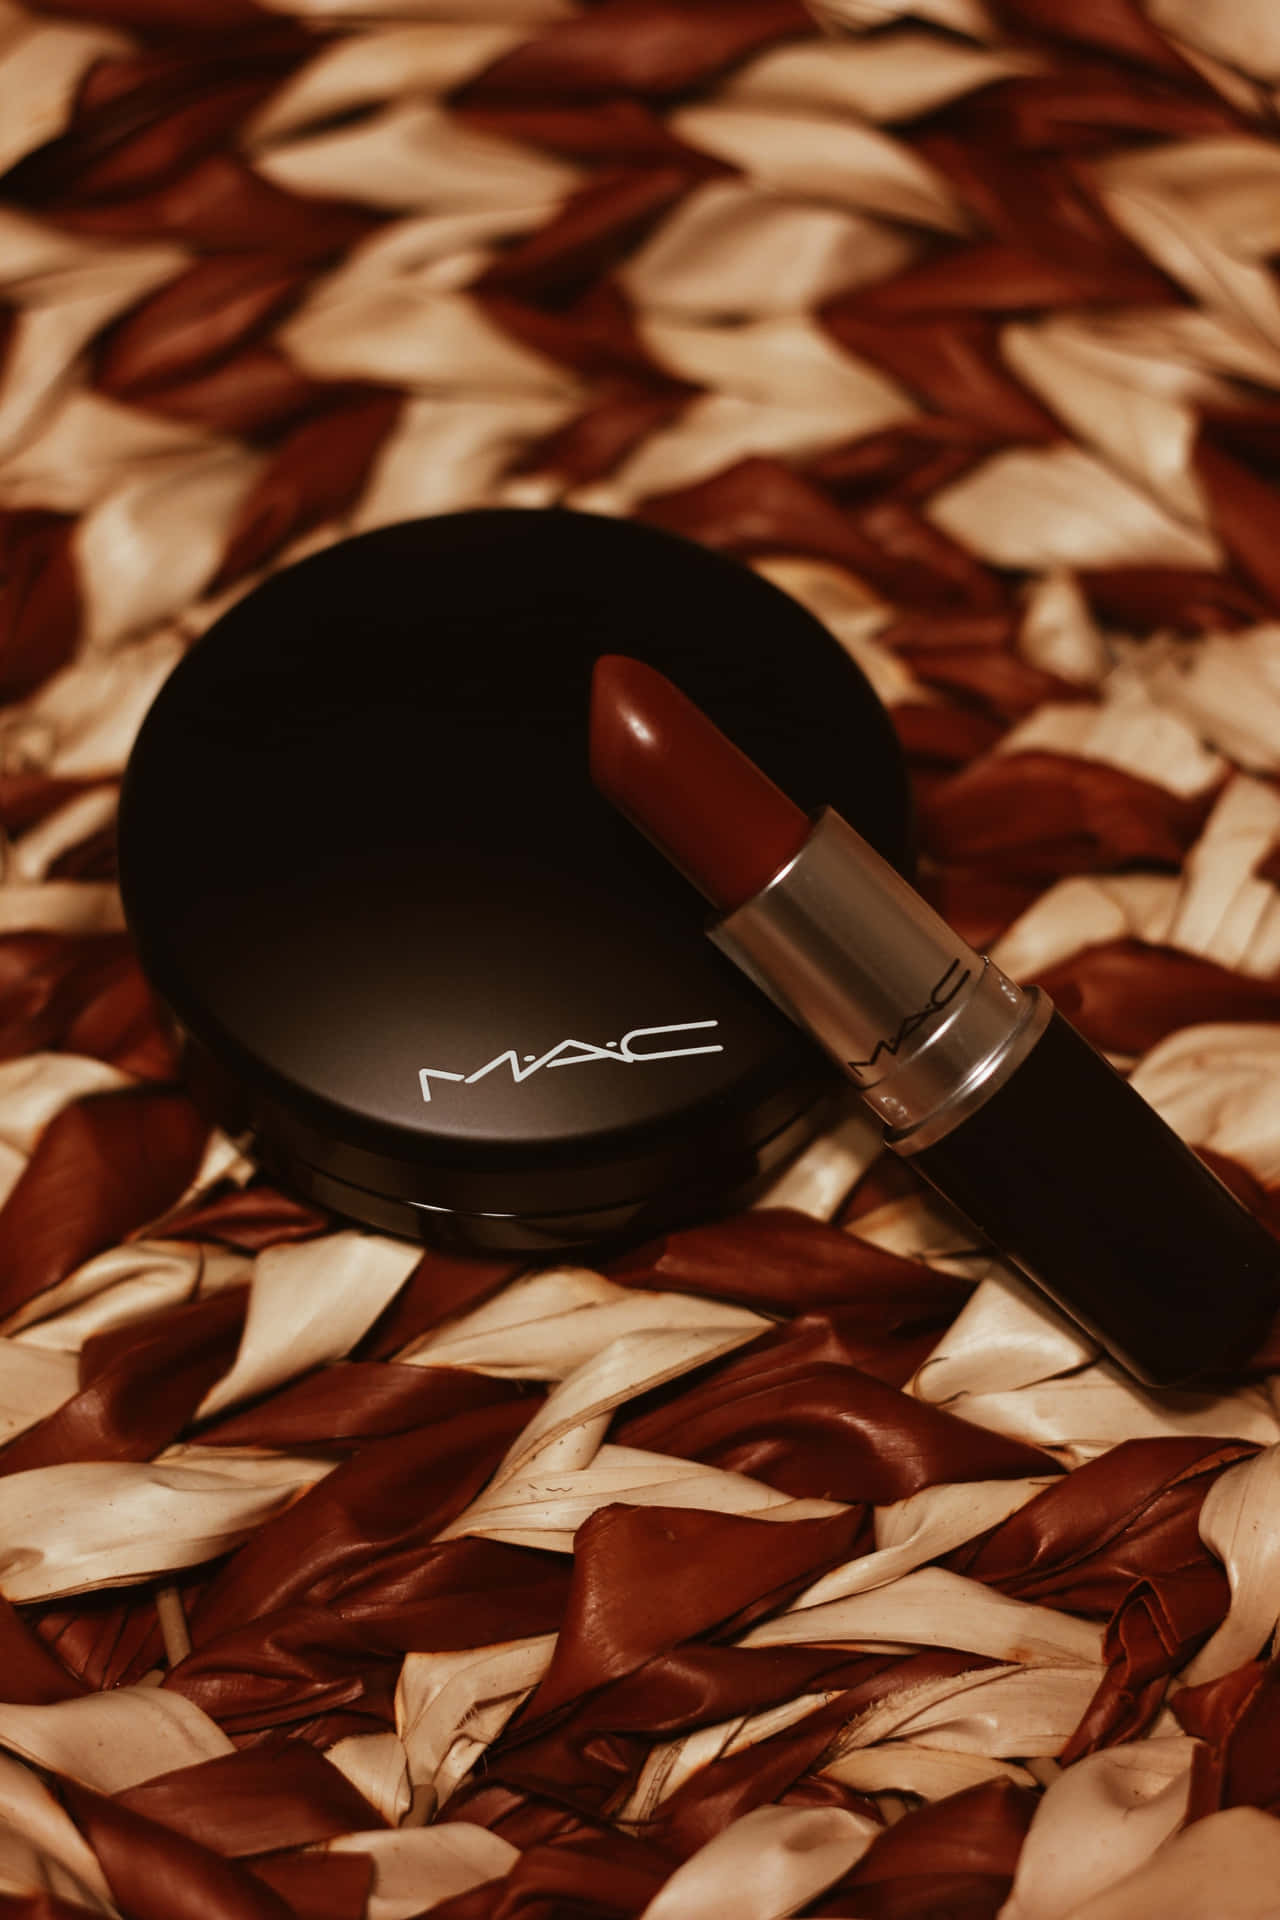 Look beautiful and natural in Mac Cosmetic's finest makeup and skincare products